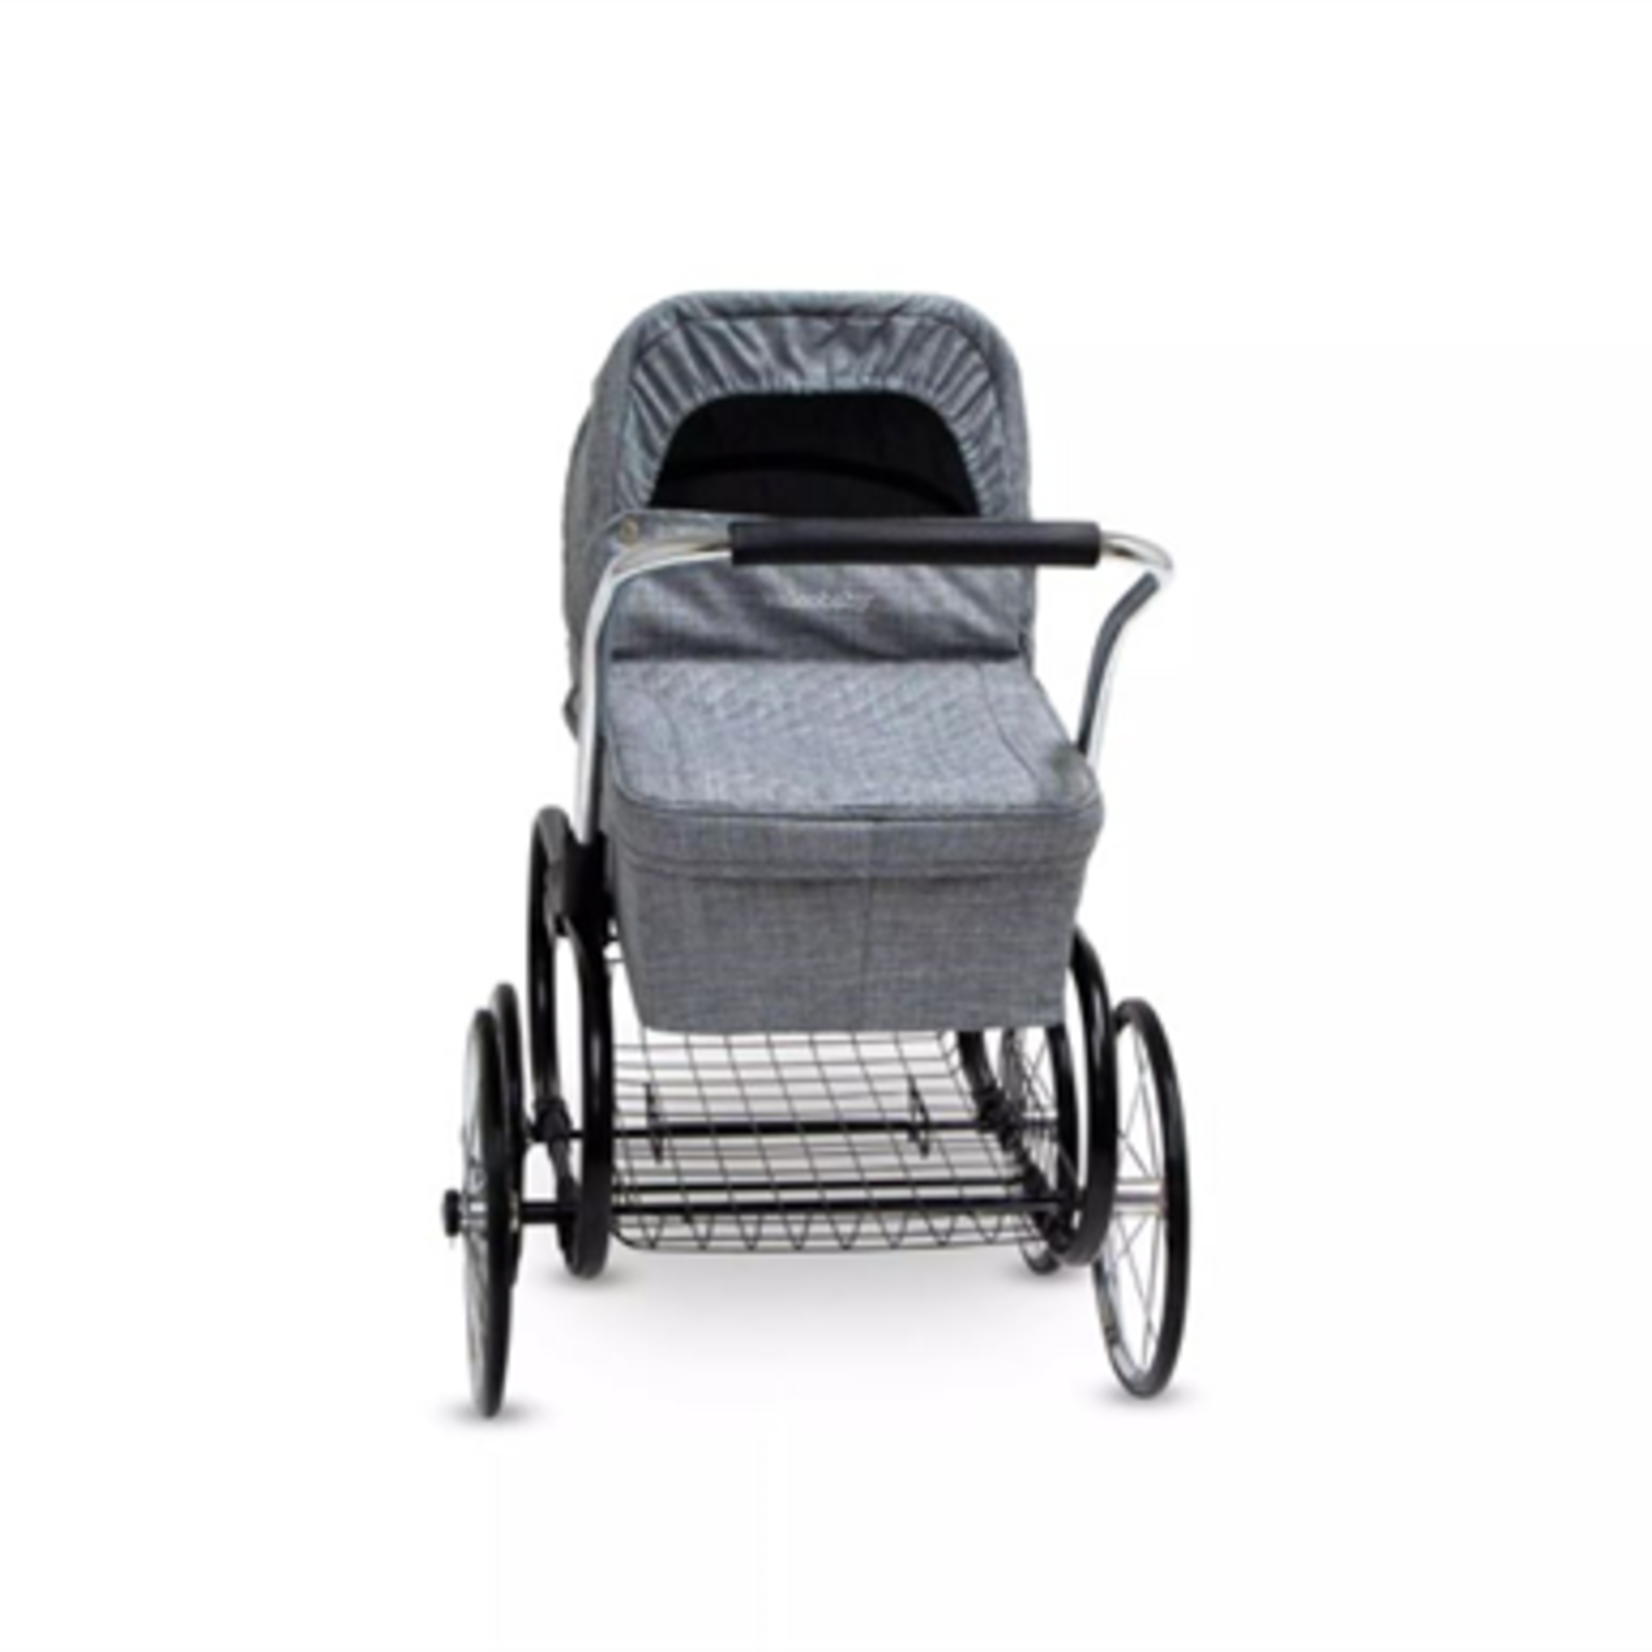 Valco Baby Royale Doll Stroller- Grey Marle